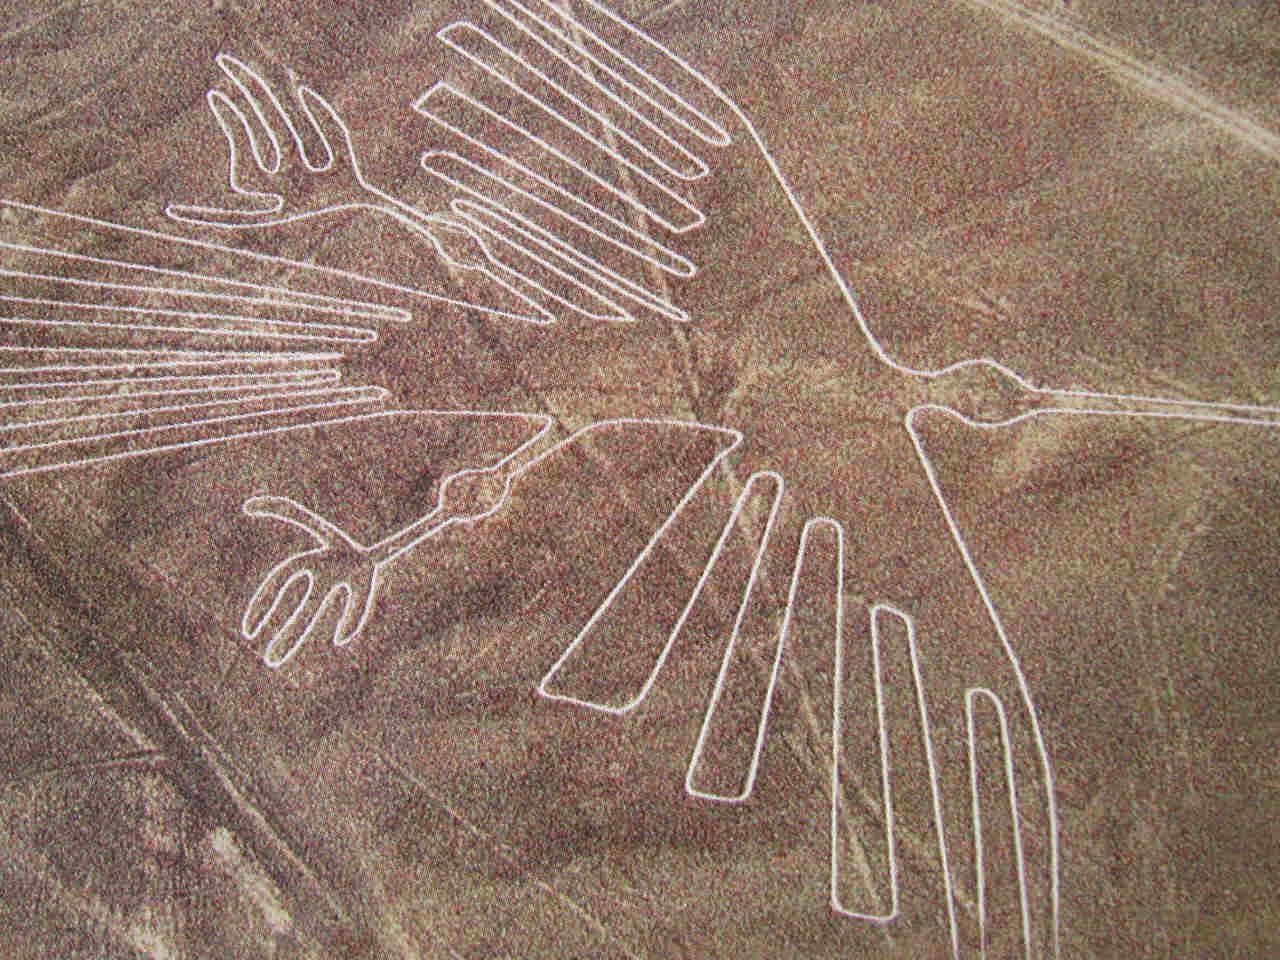 Flight over the Nasca lines